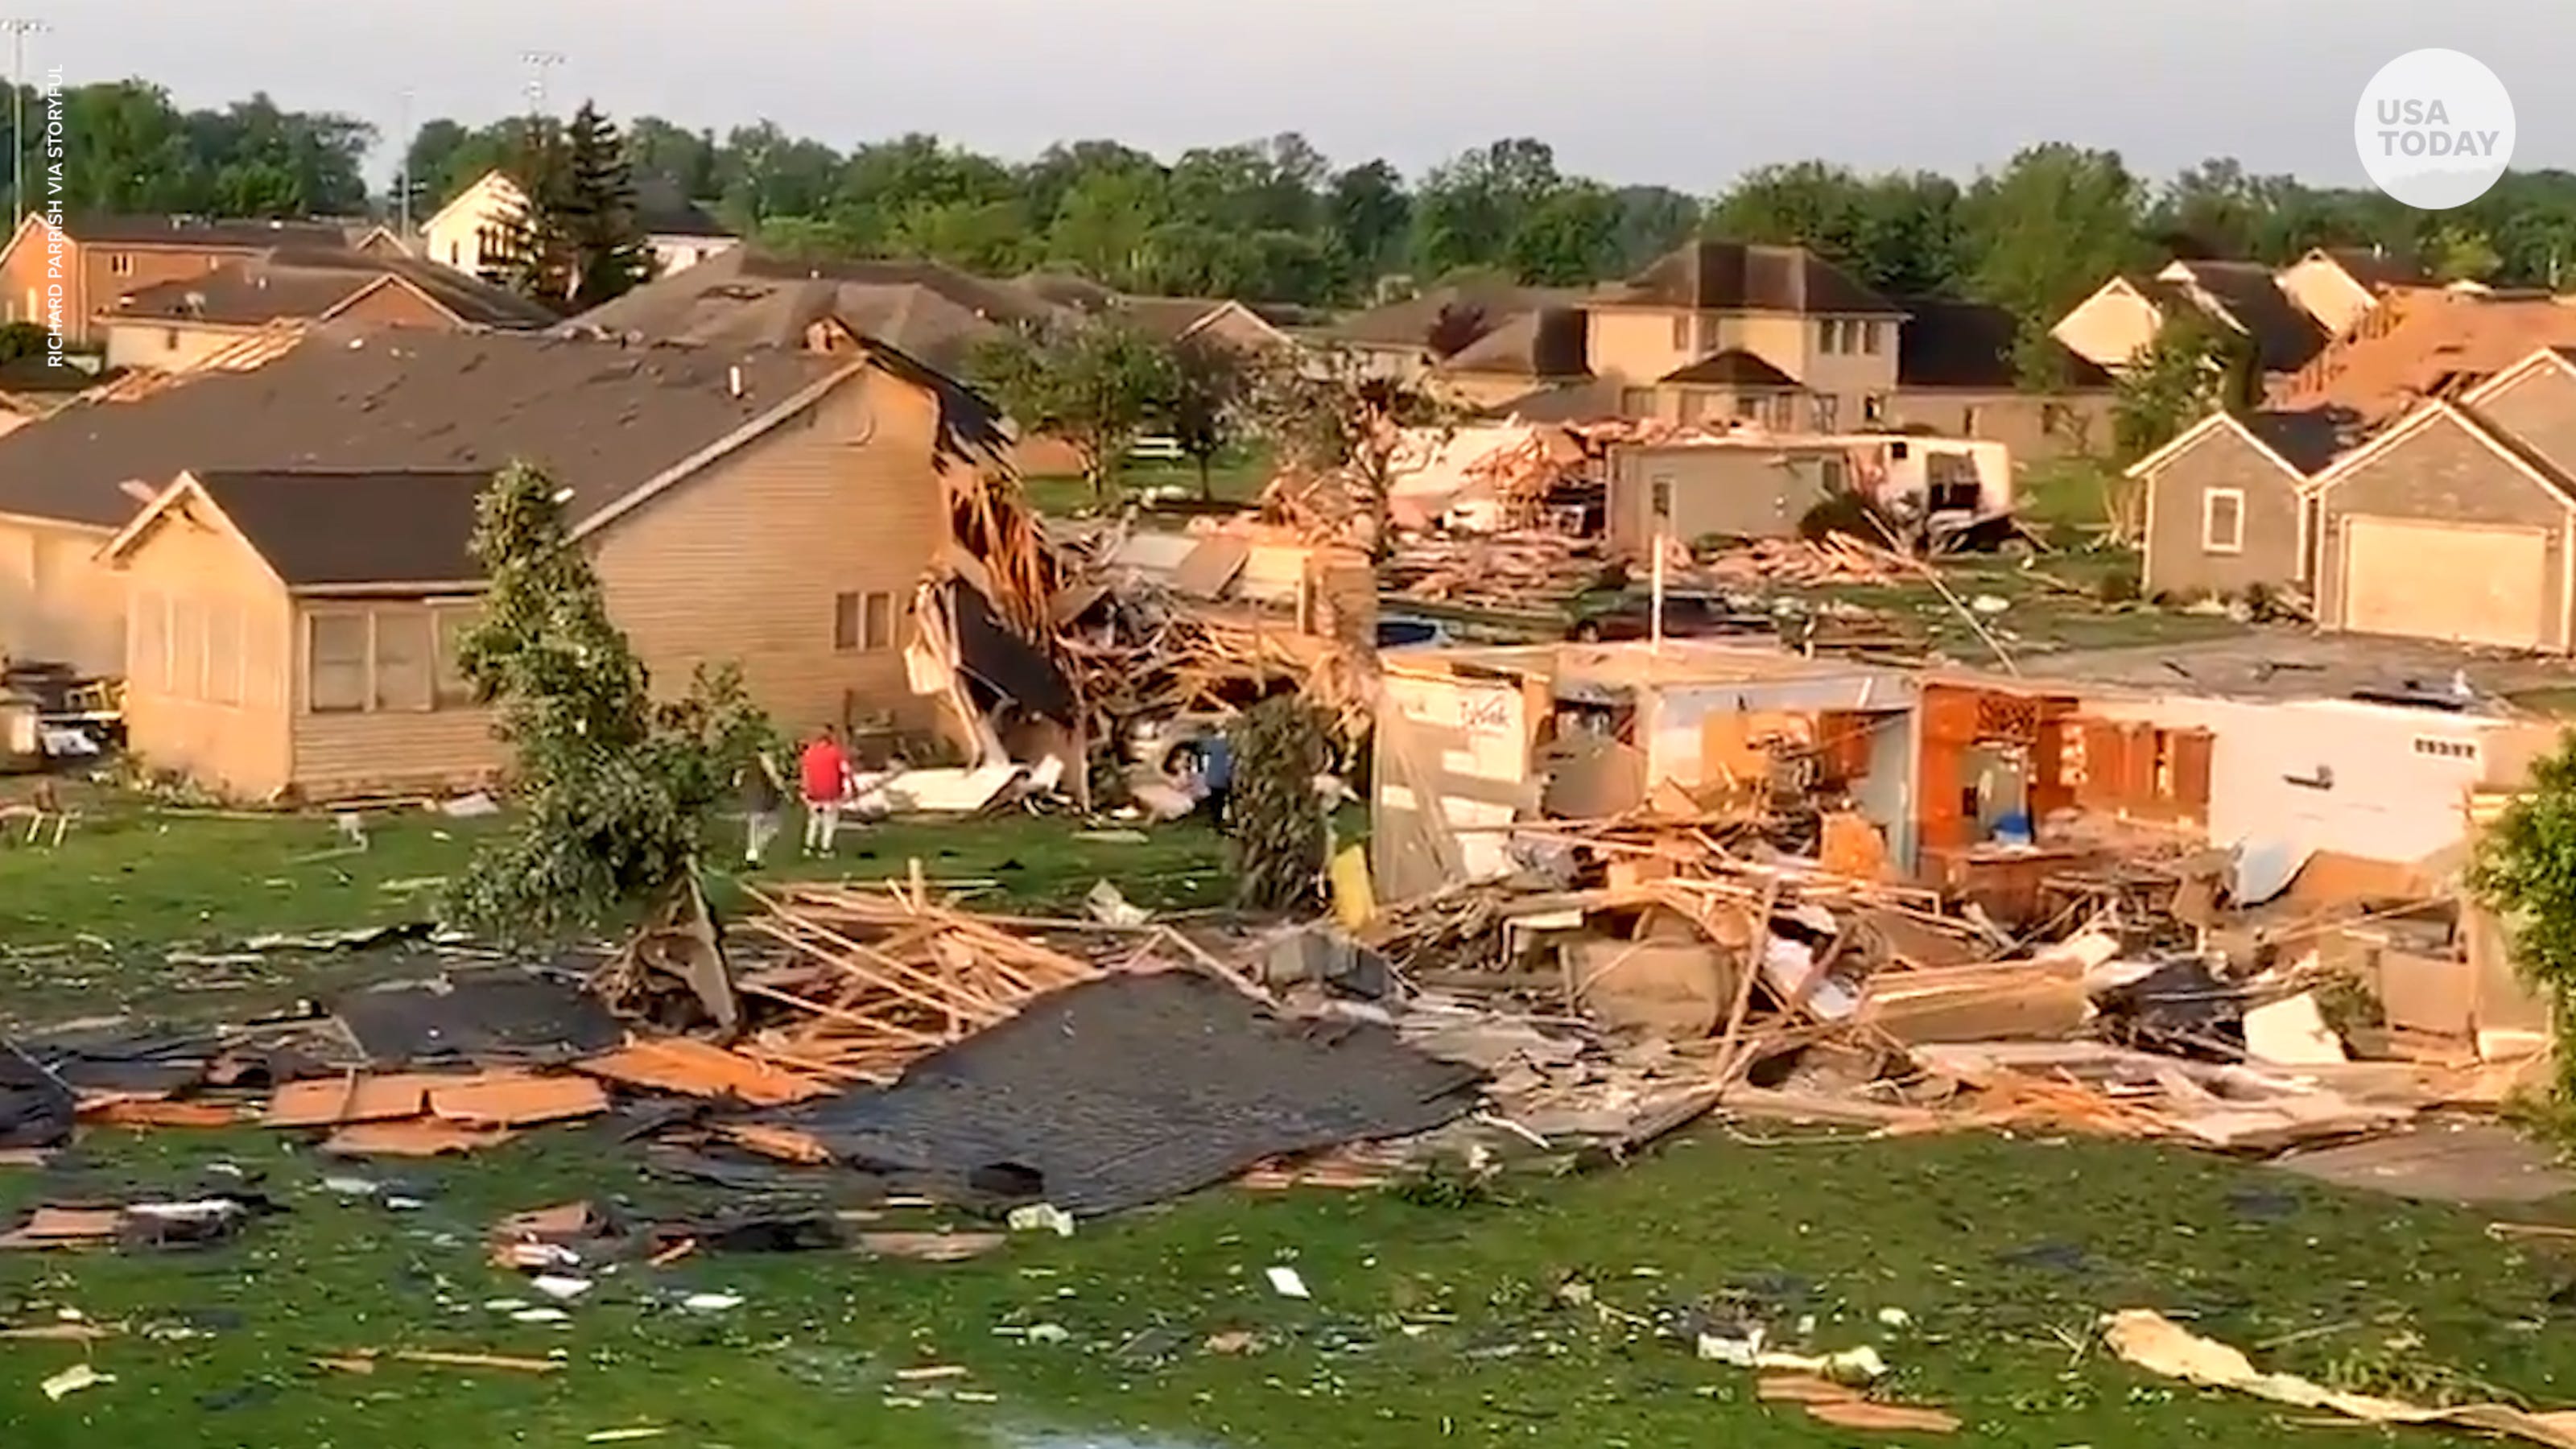 Ohio tornado rips apart homes, leaving one dead and multiple injured